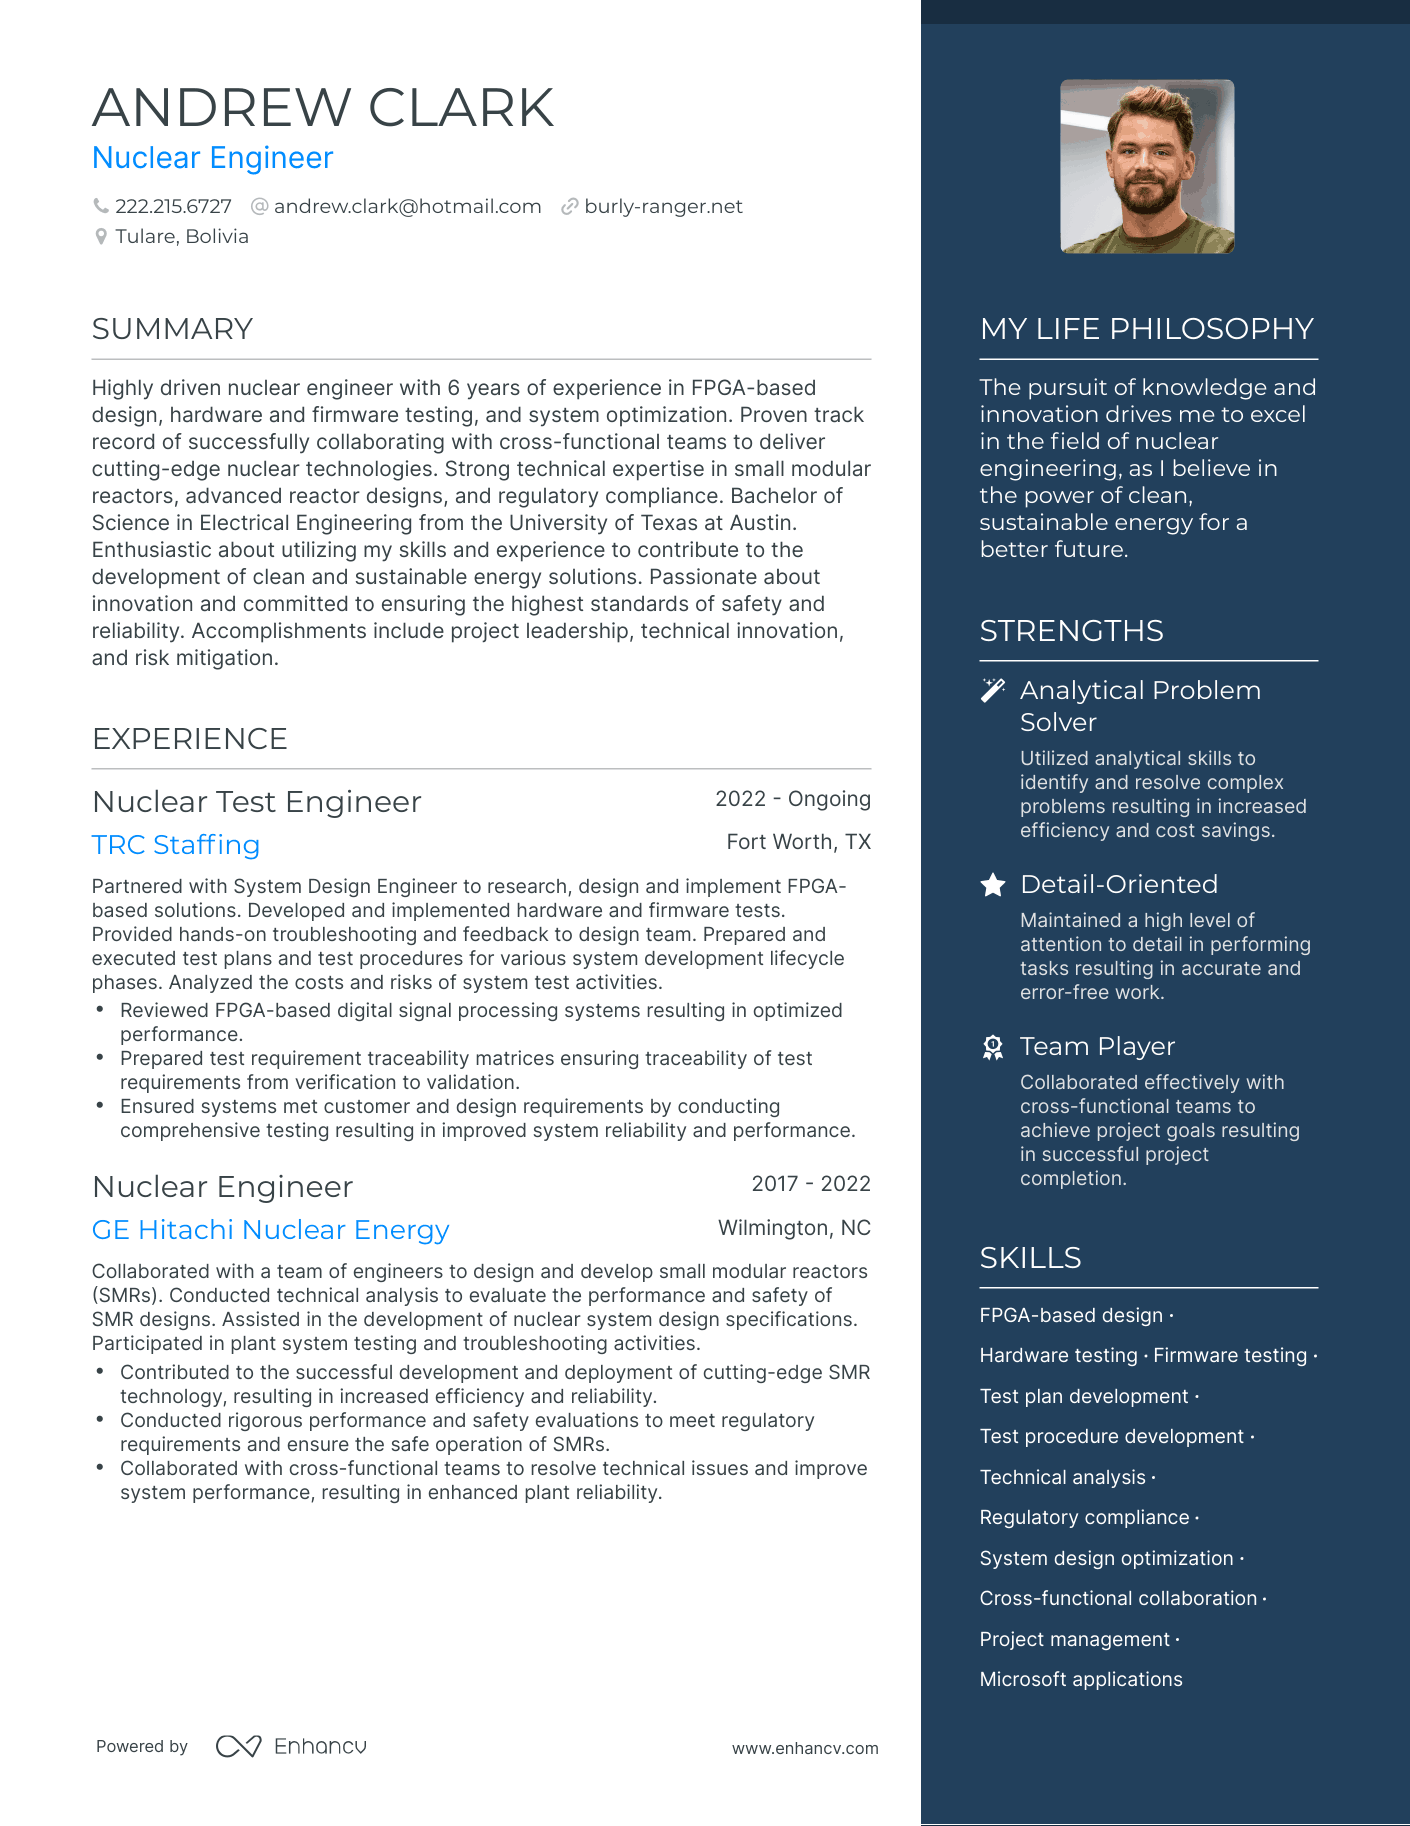 Nuclear Engineer resume example